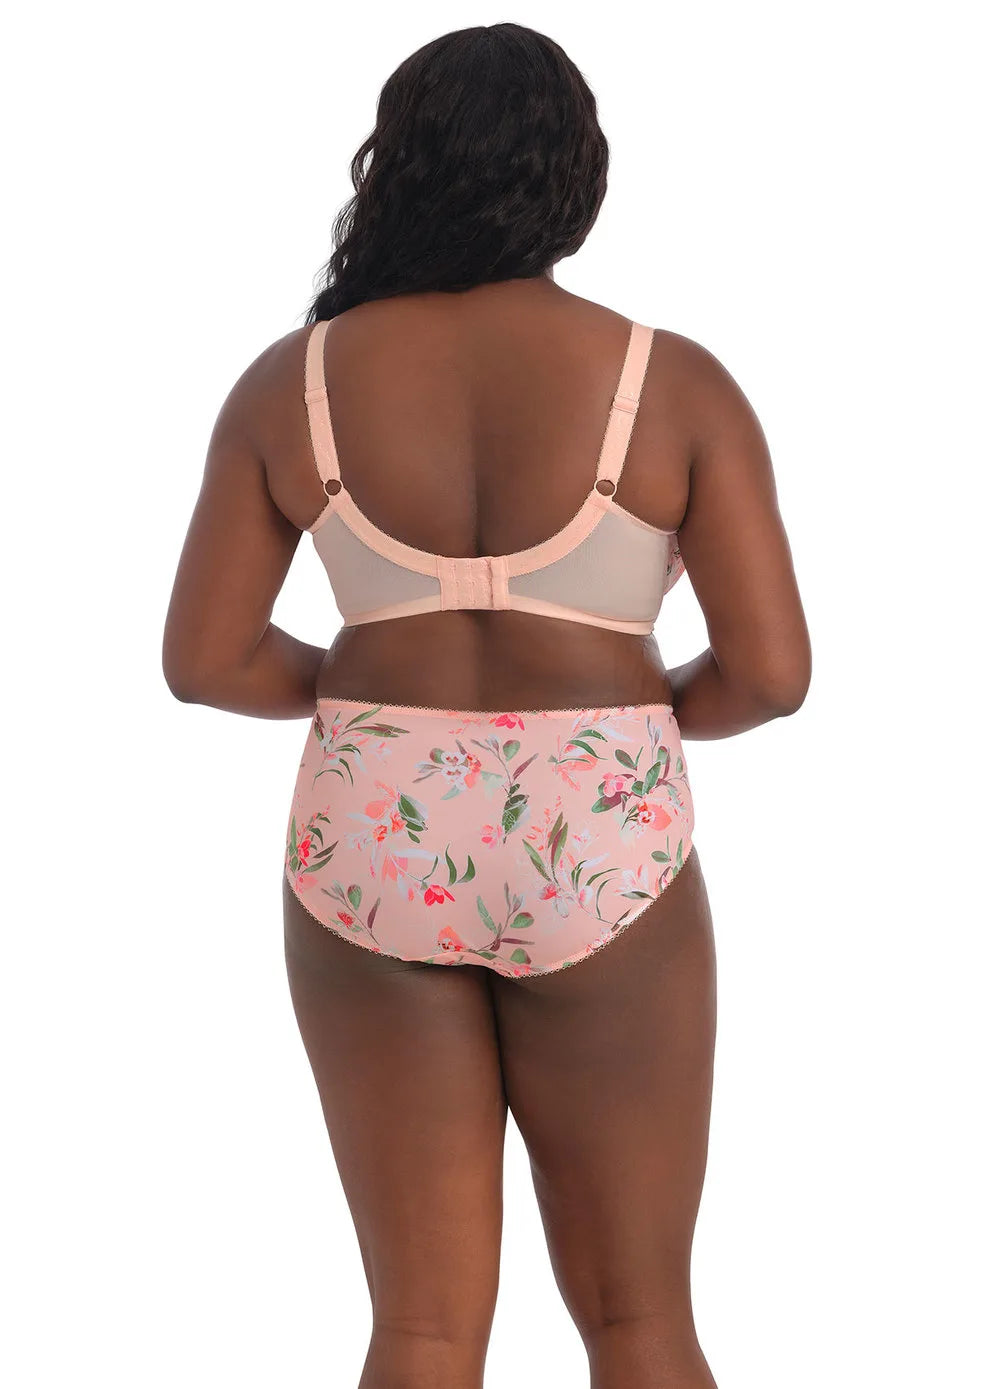 KAYLA Banded Bra by Goddess in Peach Melba at Belle Lacet Lingerie.